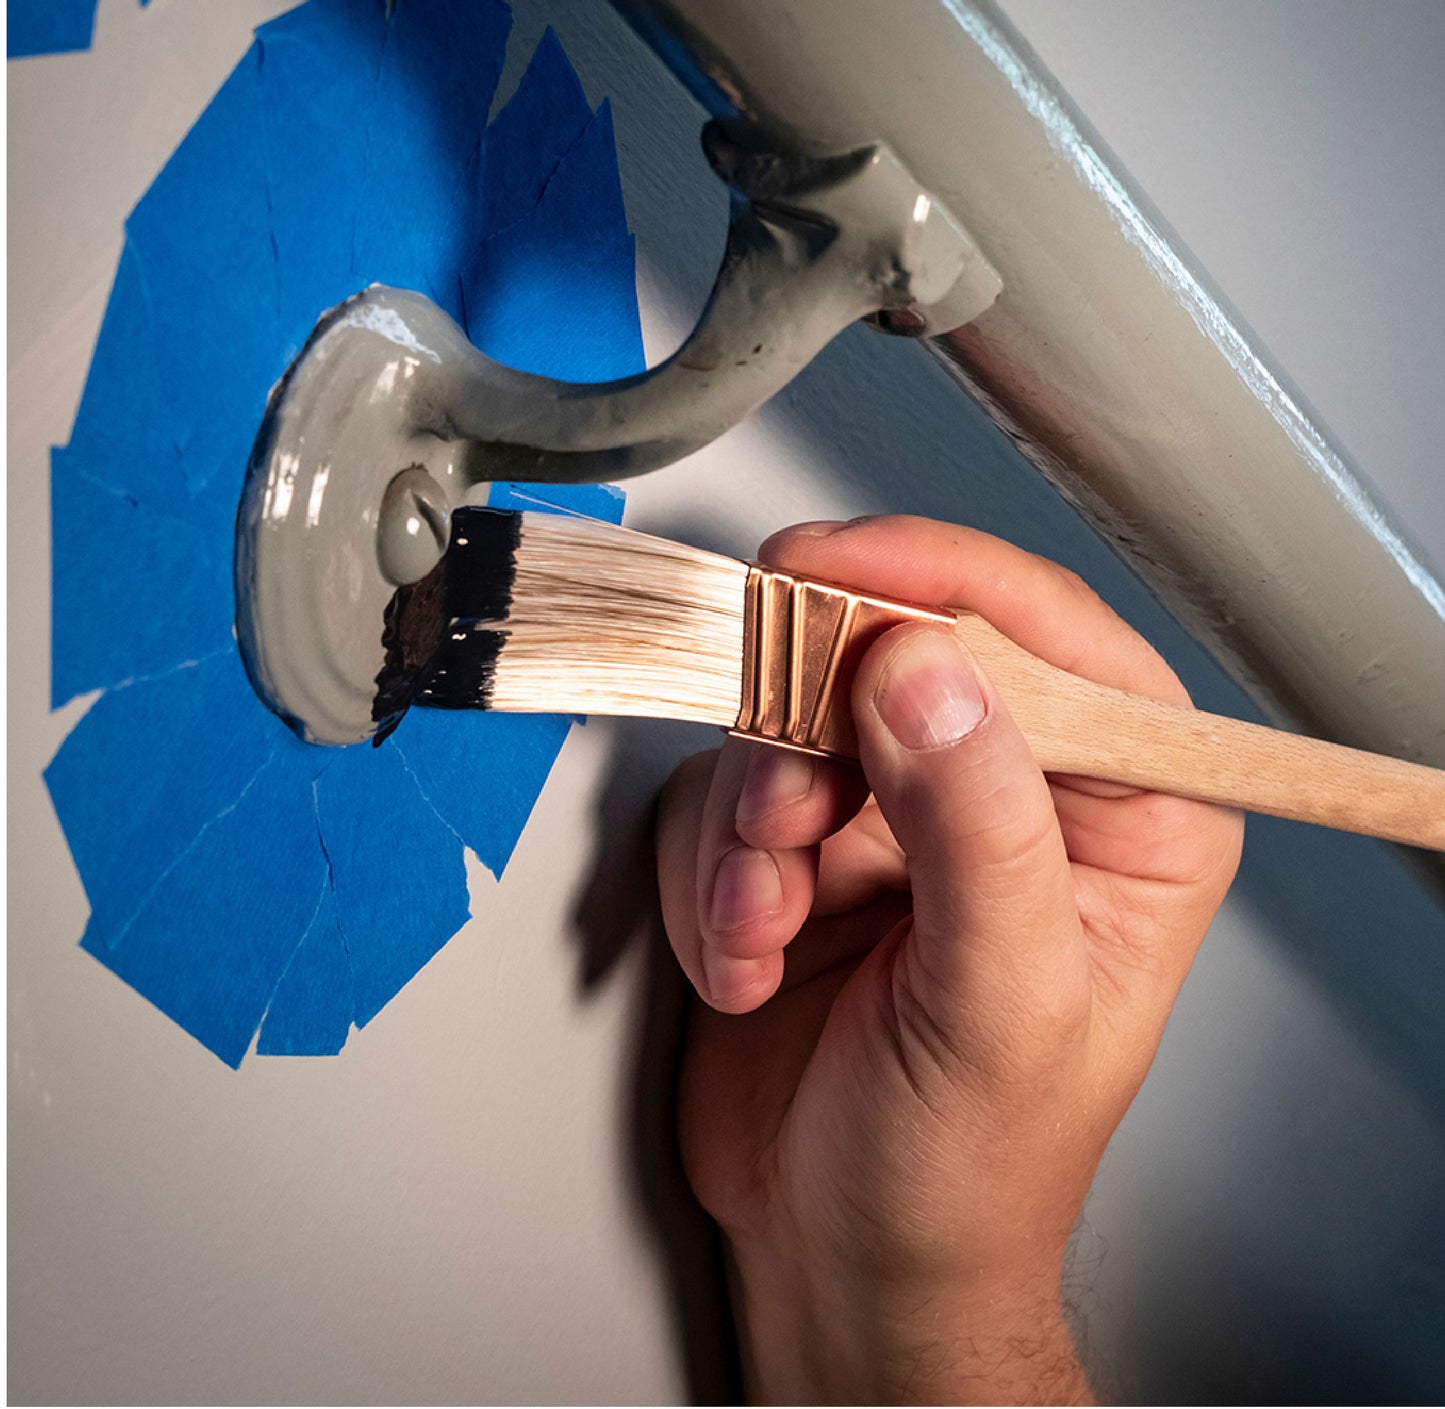 LAUCO Blue Painter's Tape Multi-Surface, Paint Tape Protects Surfaces and Removes Easily, Multi-Surface Painting Tape for Indoor and Outdoor Use